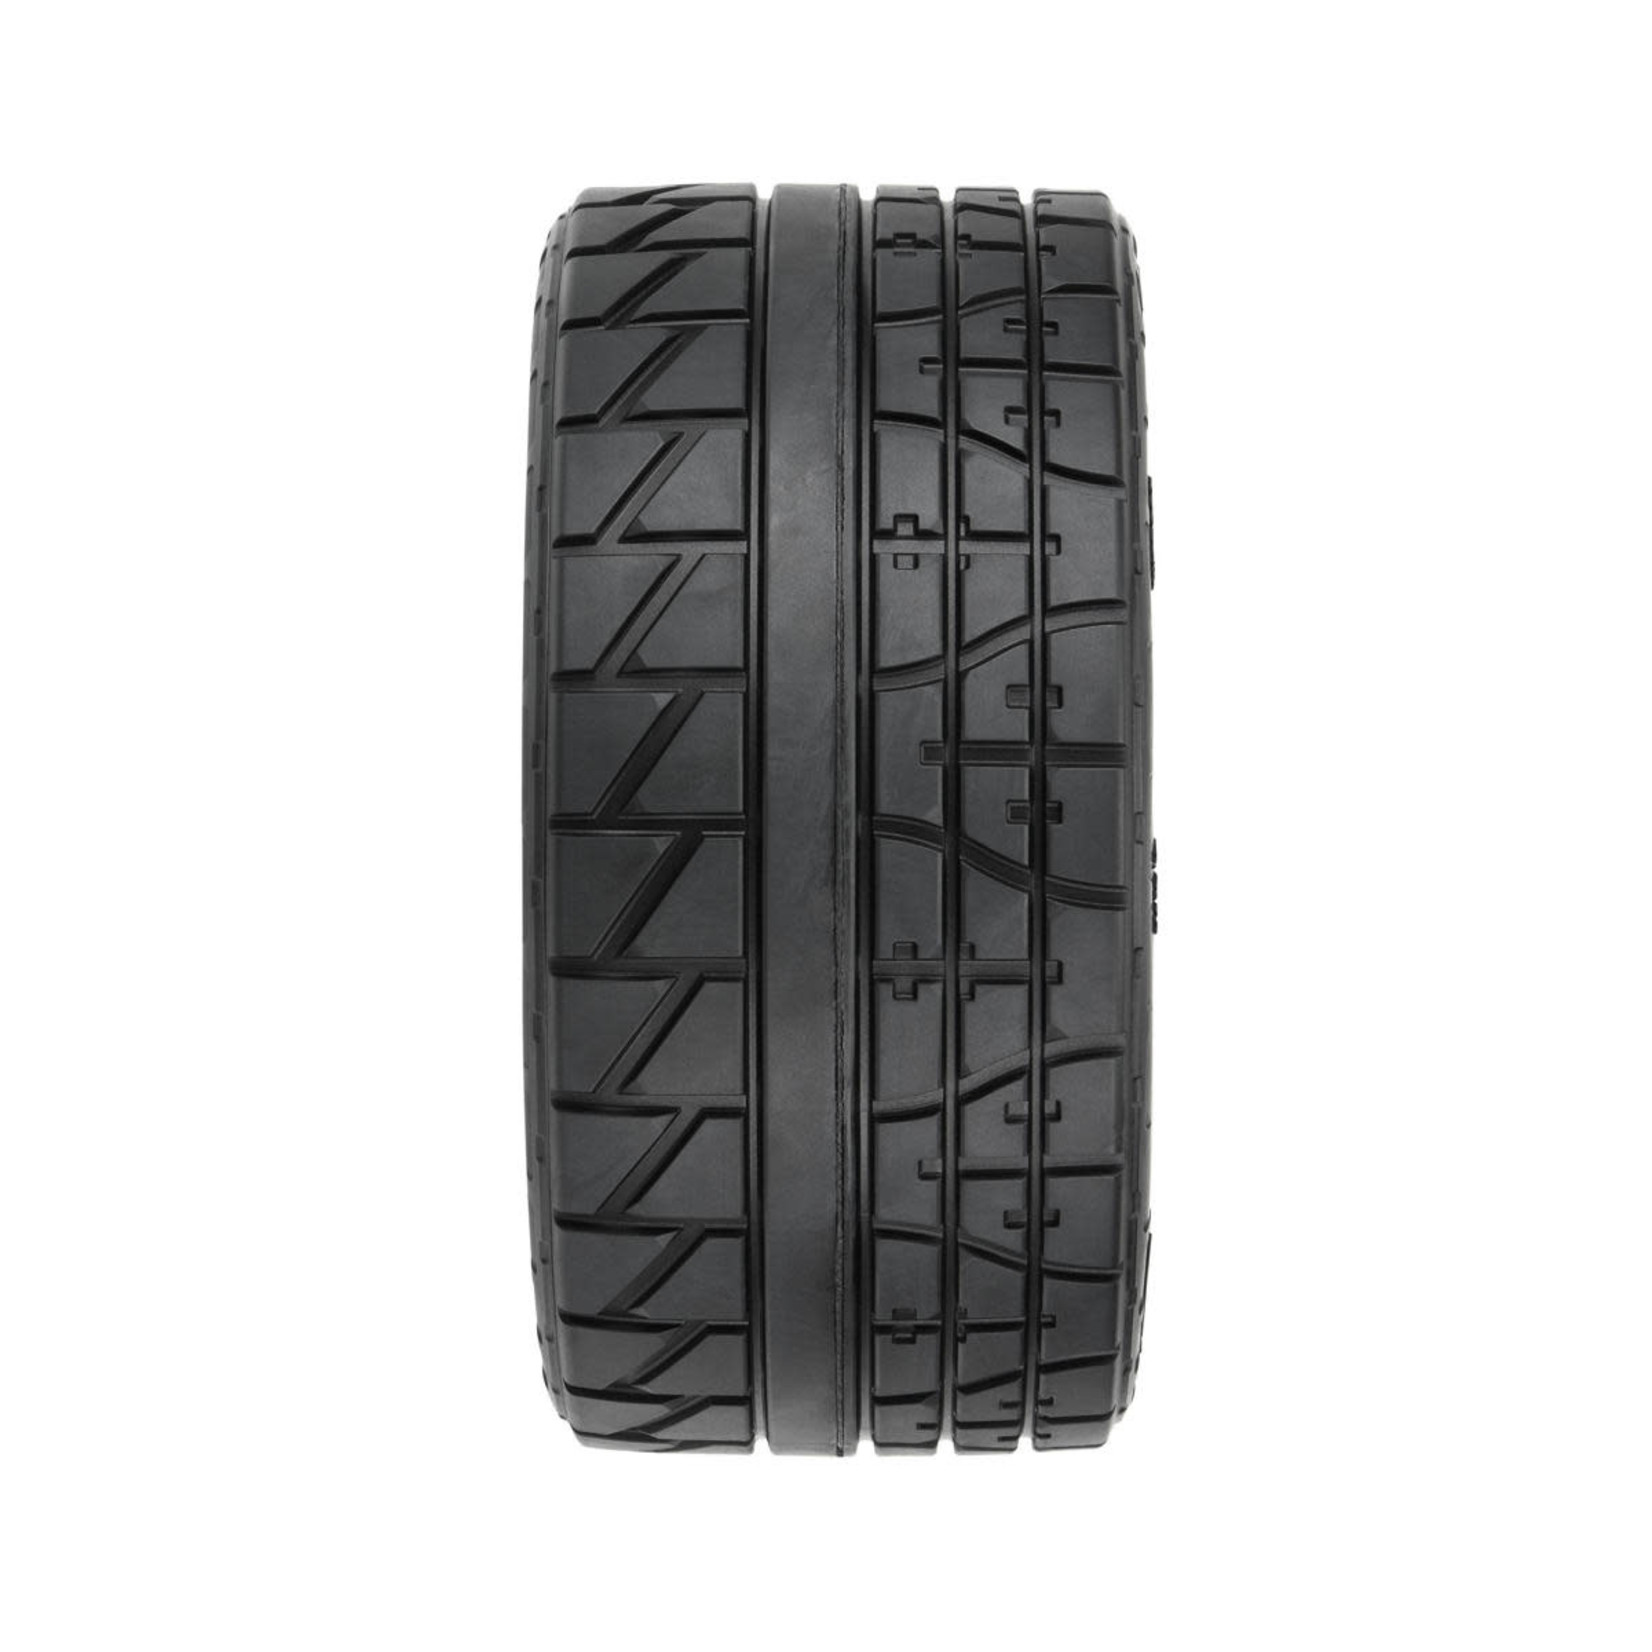 Pro-Line Pro-Line 1/6 Menace HP Belted Pre-Mounted 8S Monster Truck Tire (Black) (2) (G8) w/24mm Hex #10205-10